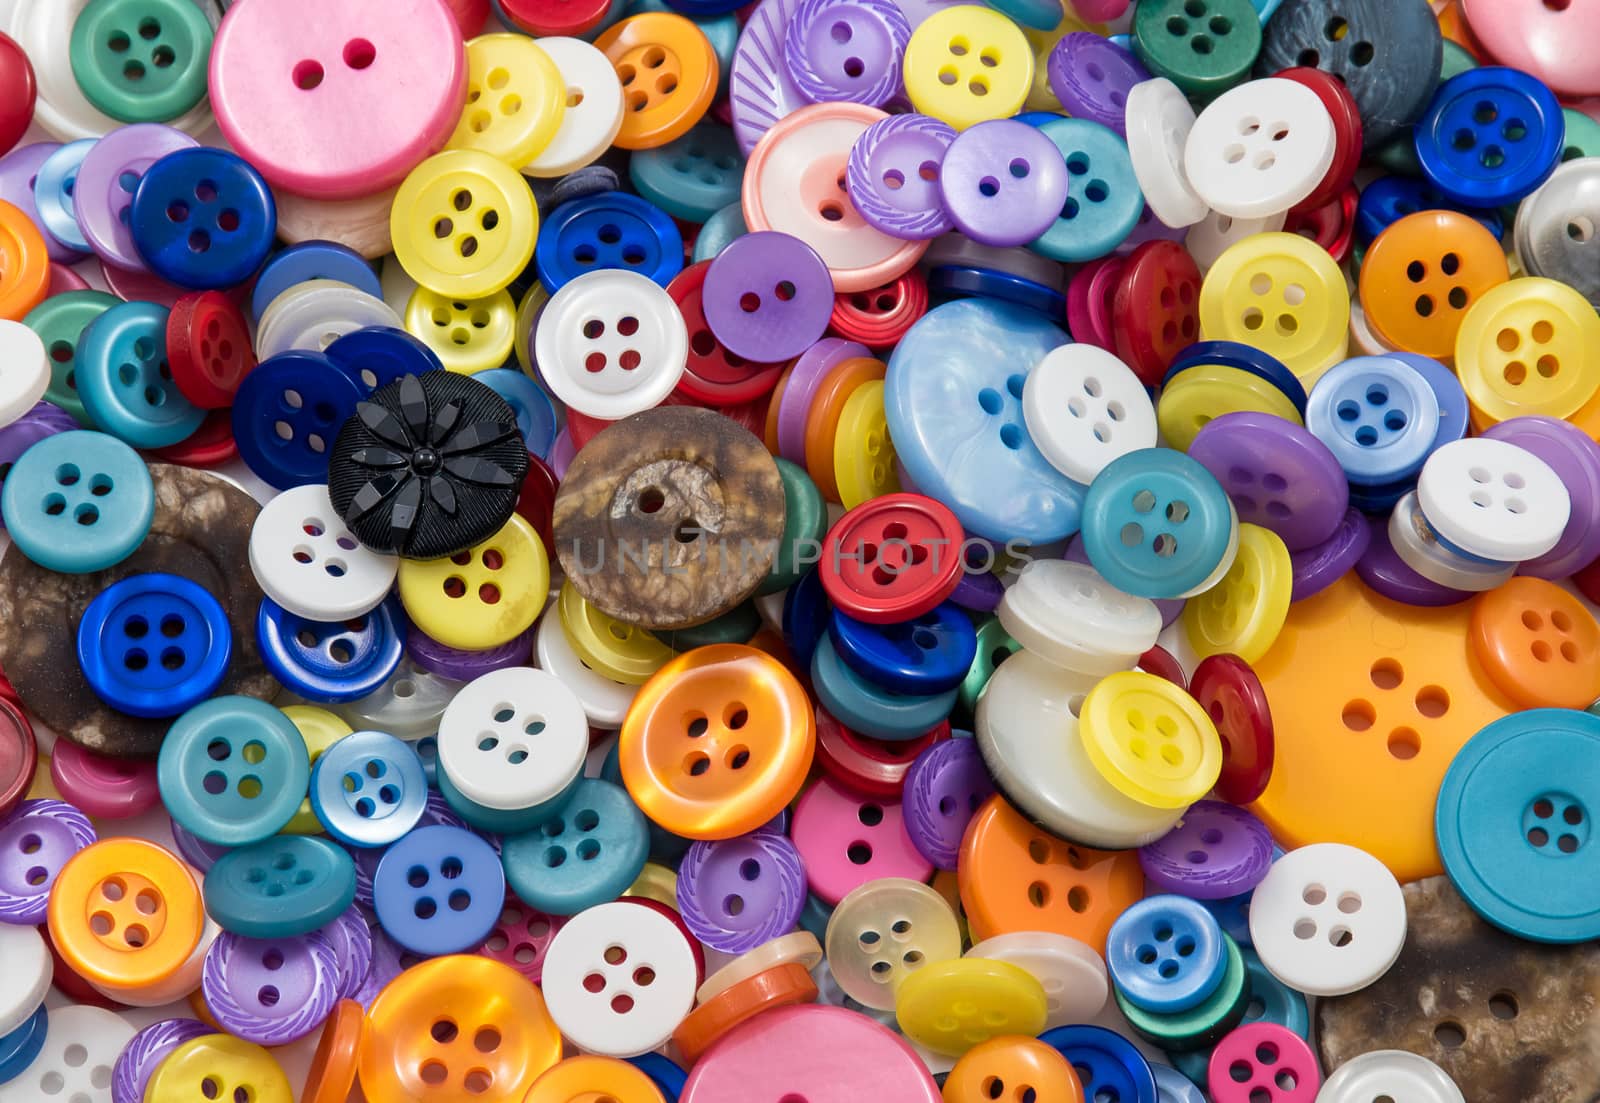 Assorted Buttons Background  by Russell102